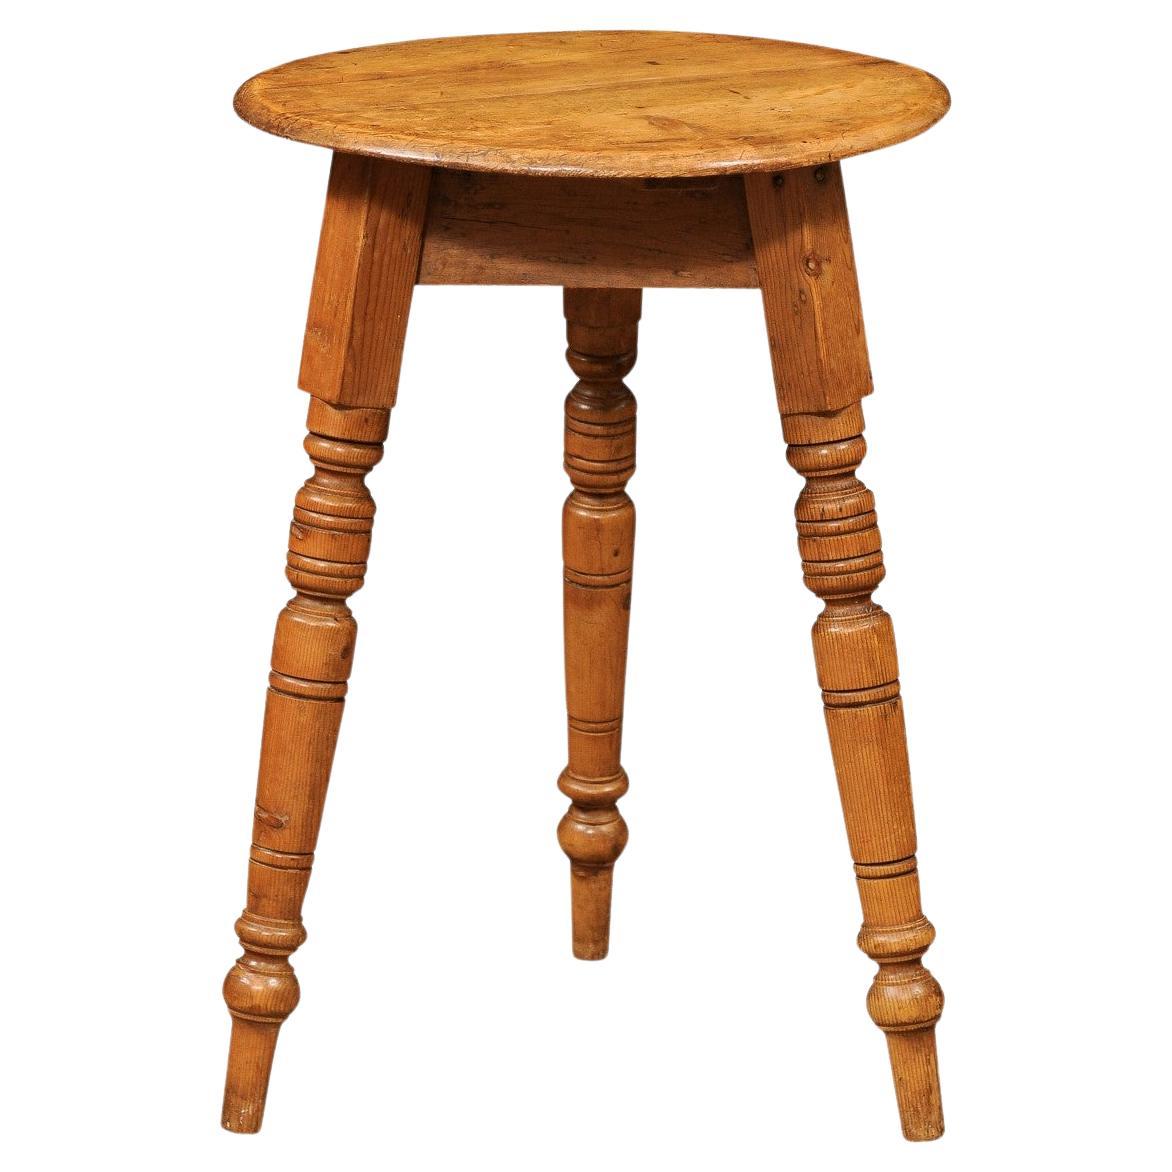  Late 19th Century English Pine Cricket Table with Turned Legs For Sale